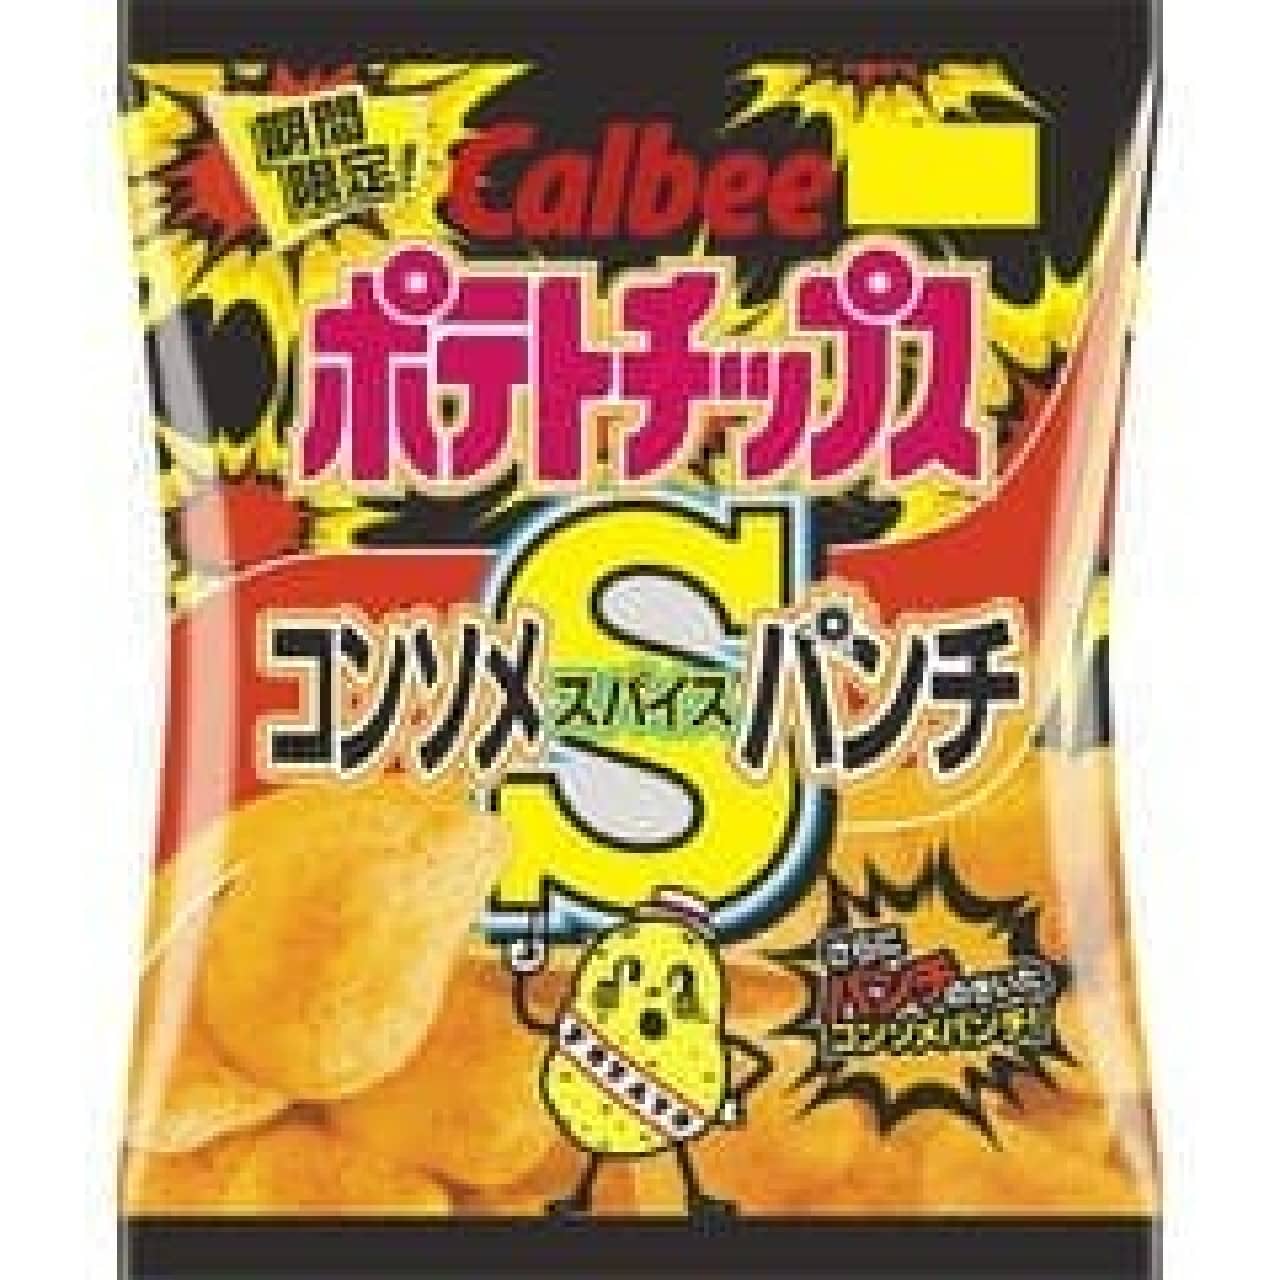 Calbee "Potato Chips Consomme S Punch"